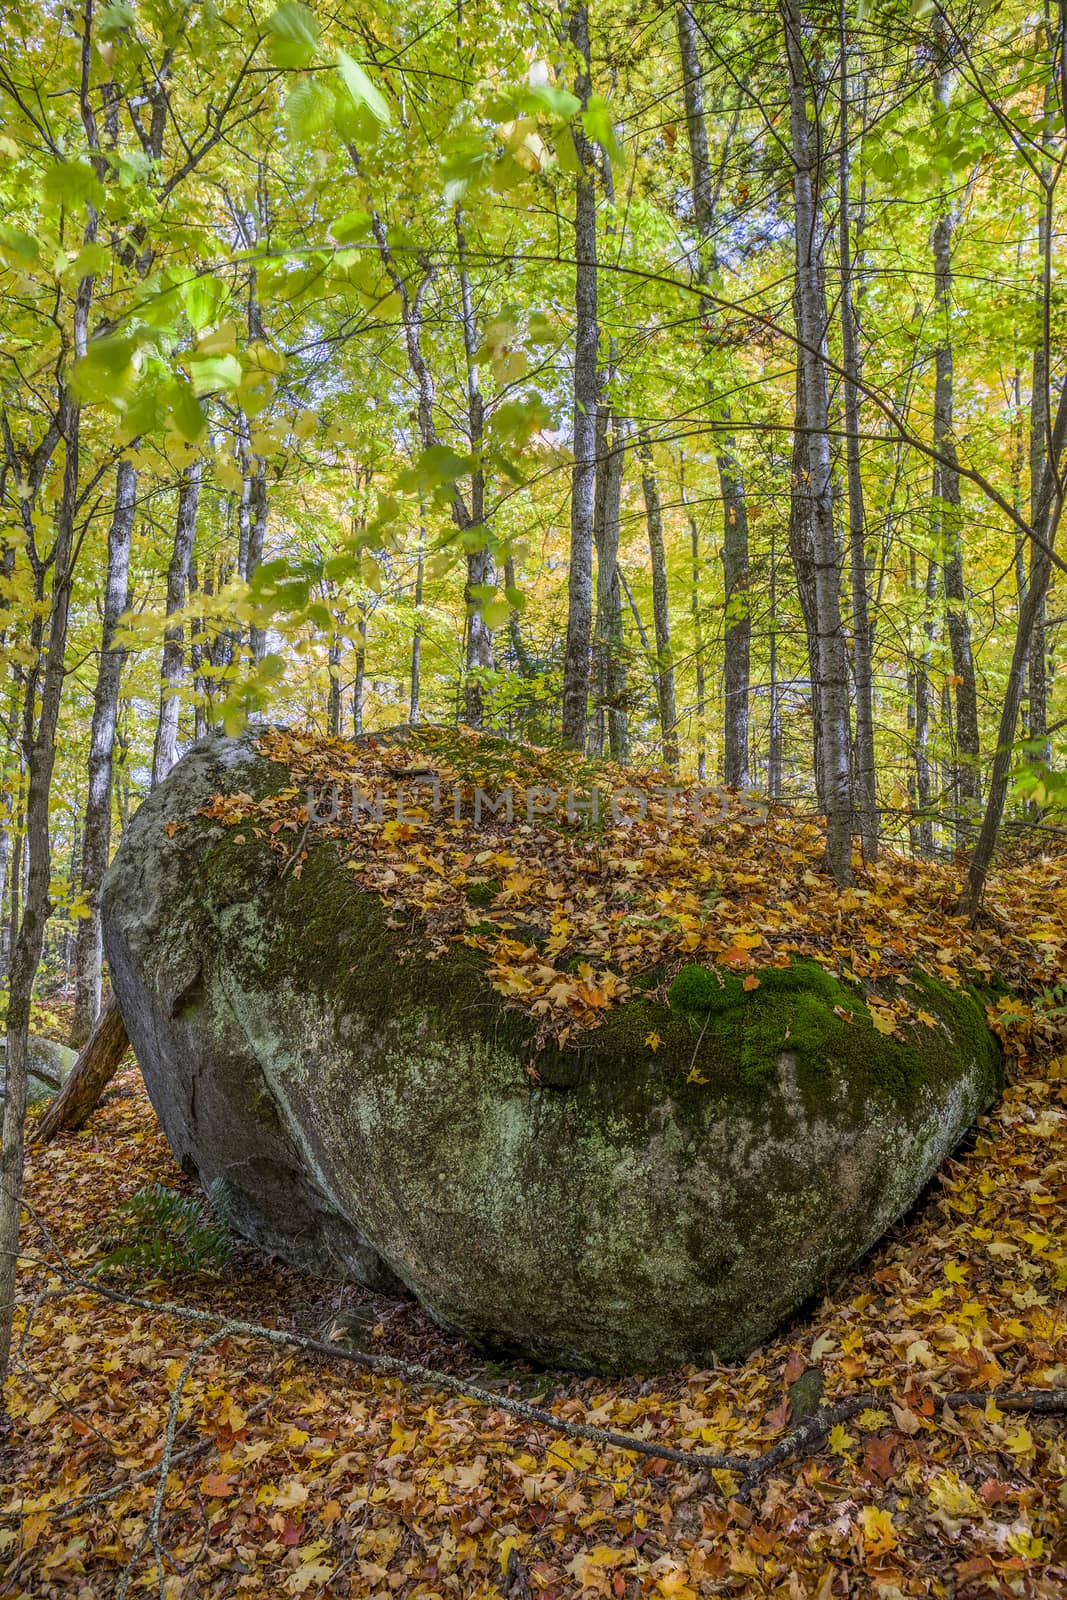 Large Precambrian Boulder in a Fall Forest - Algonquin Provincial Park, Ontario, Canada